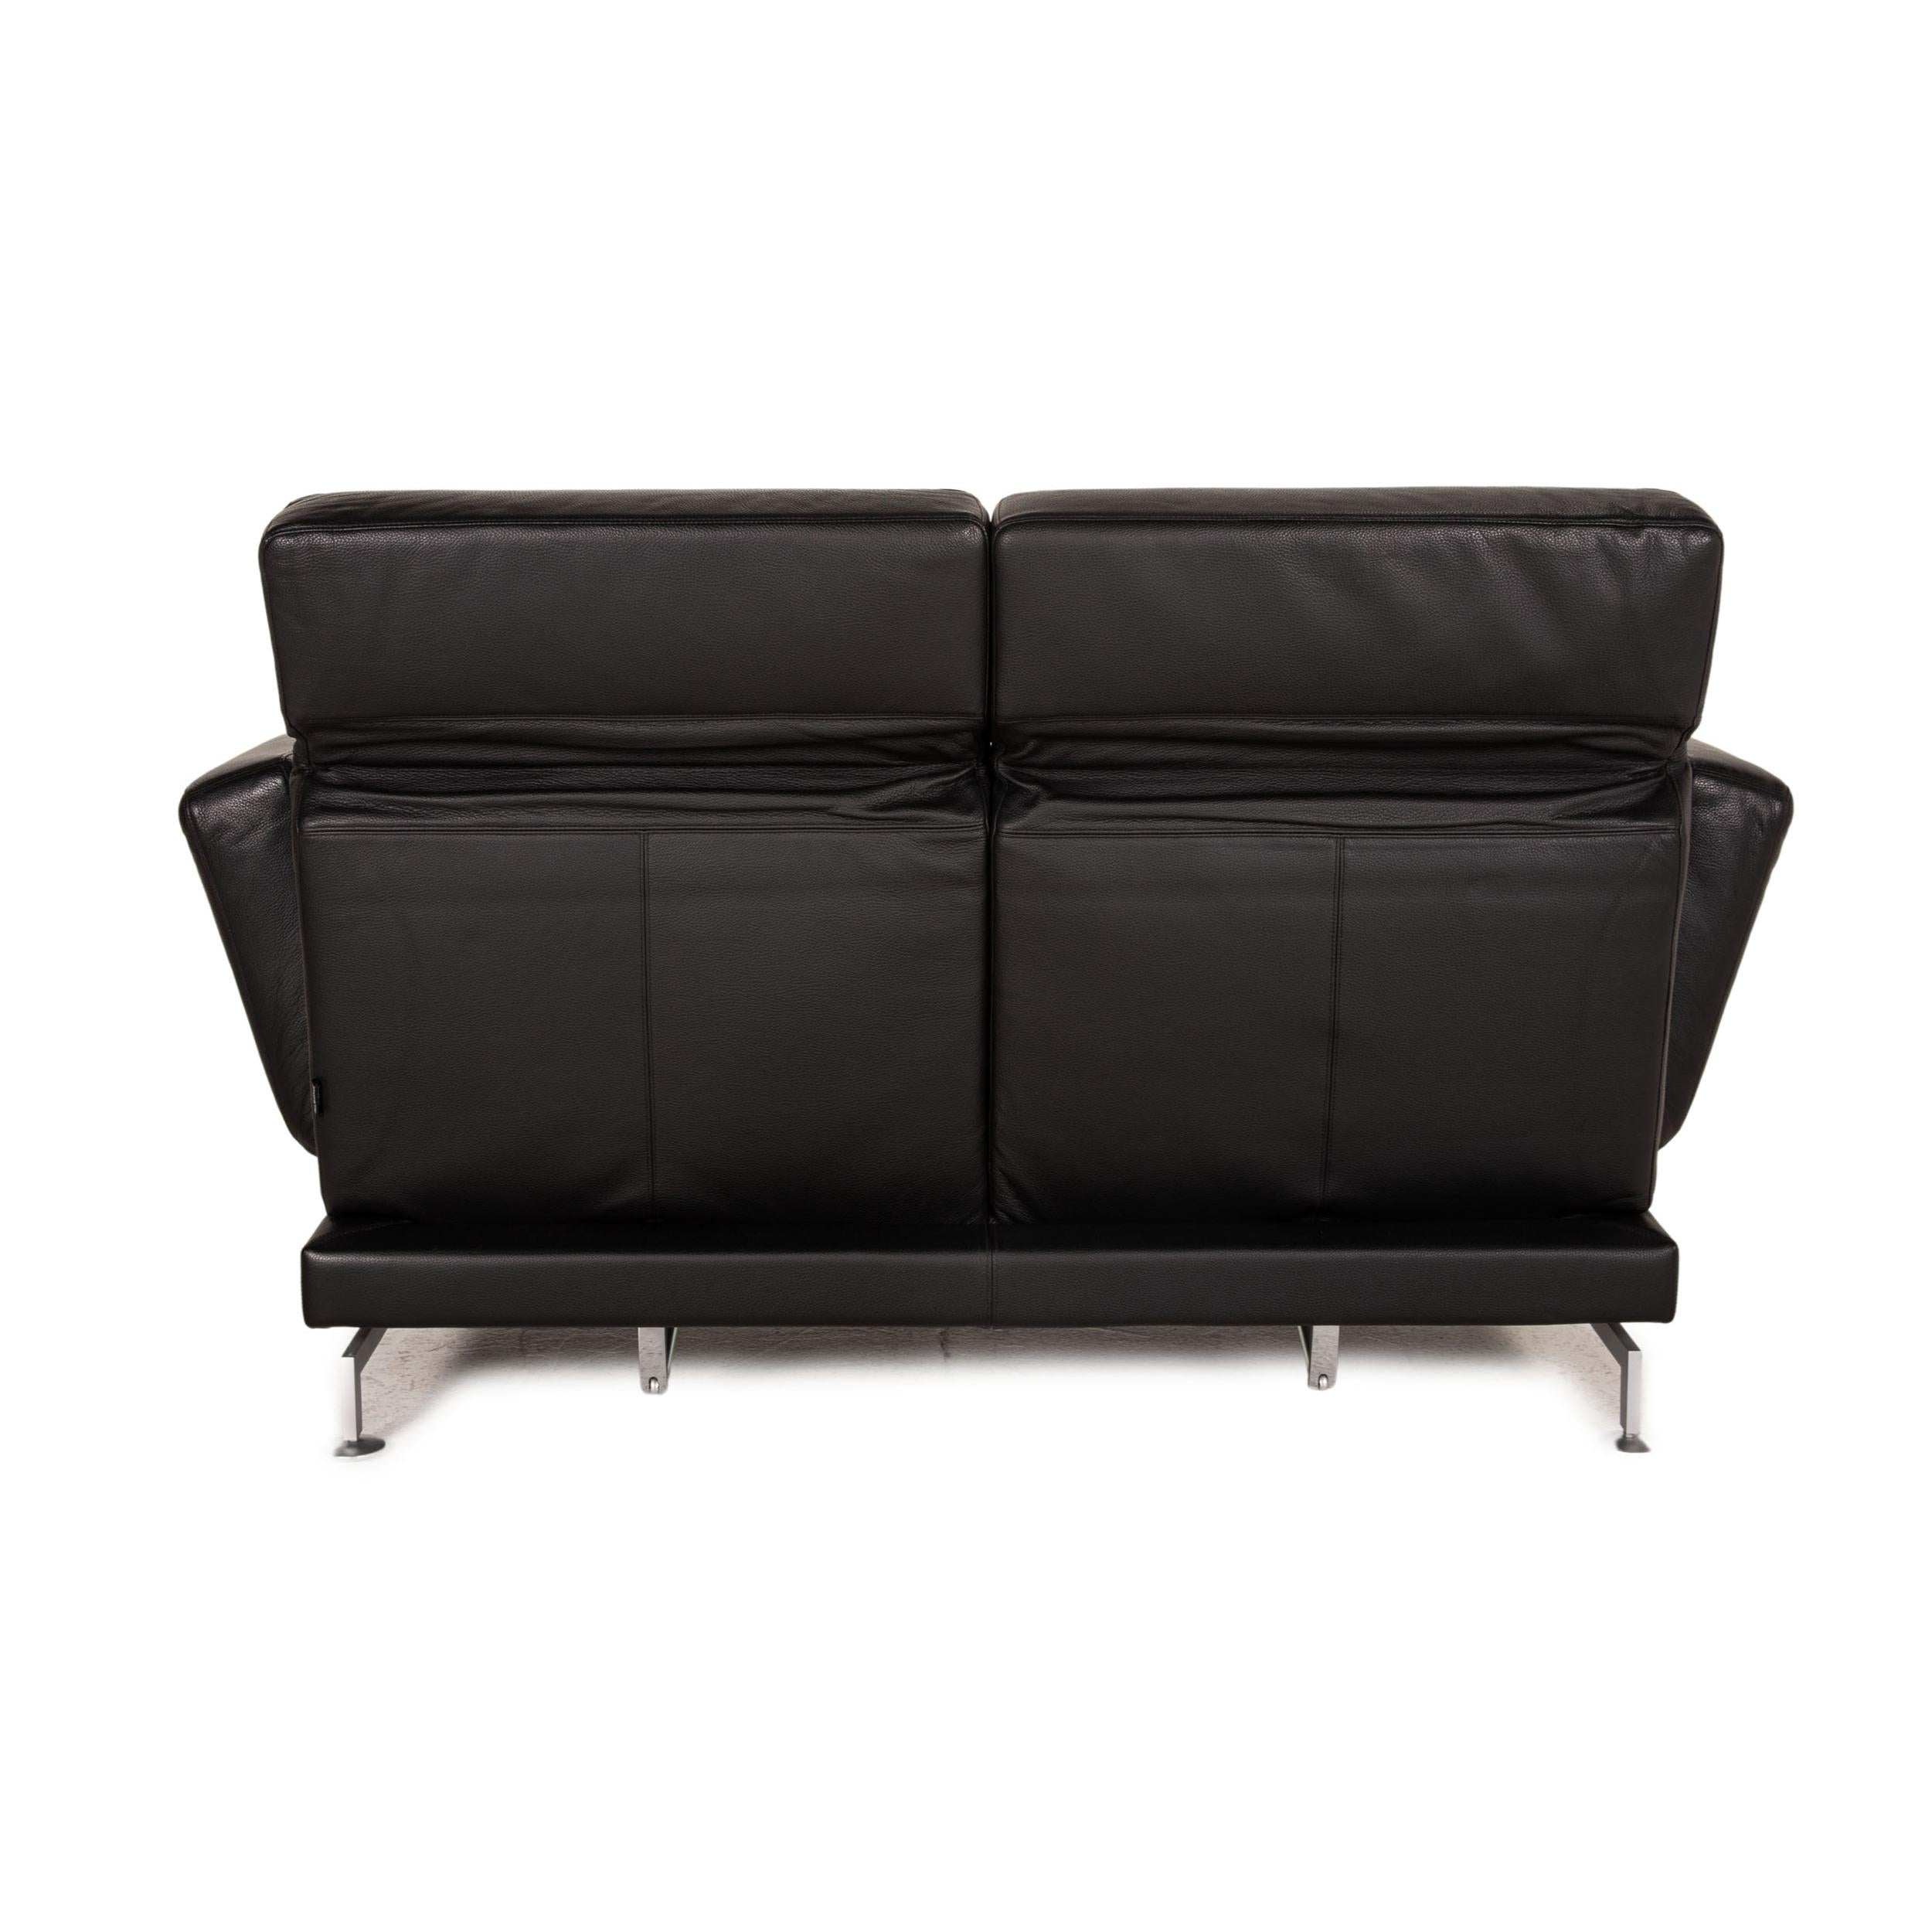 Brühl & Sippold Moule Leather Sofa Black Two-Seater Couch Function Sleeping 3